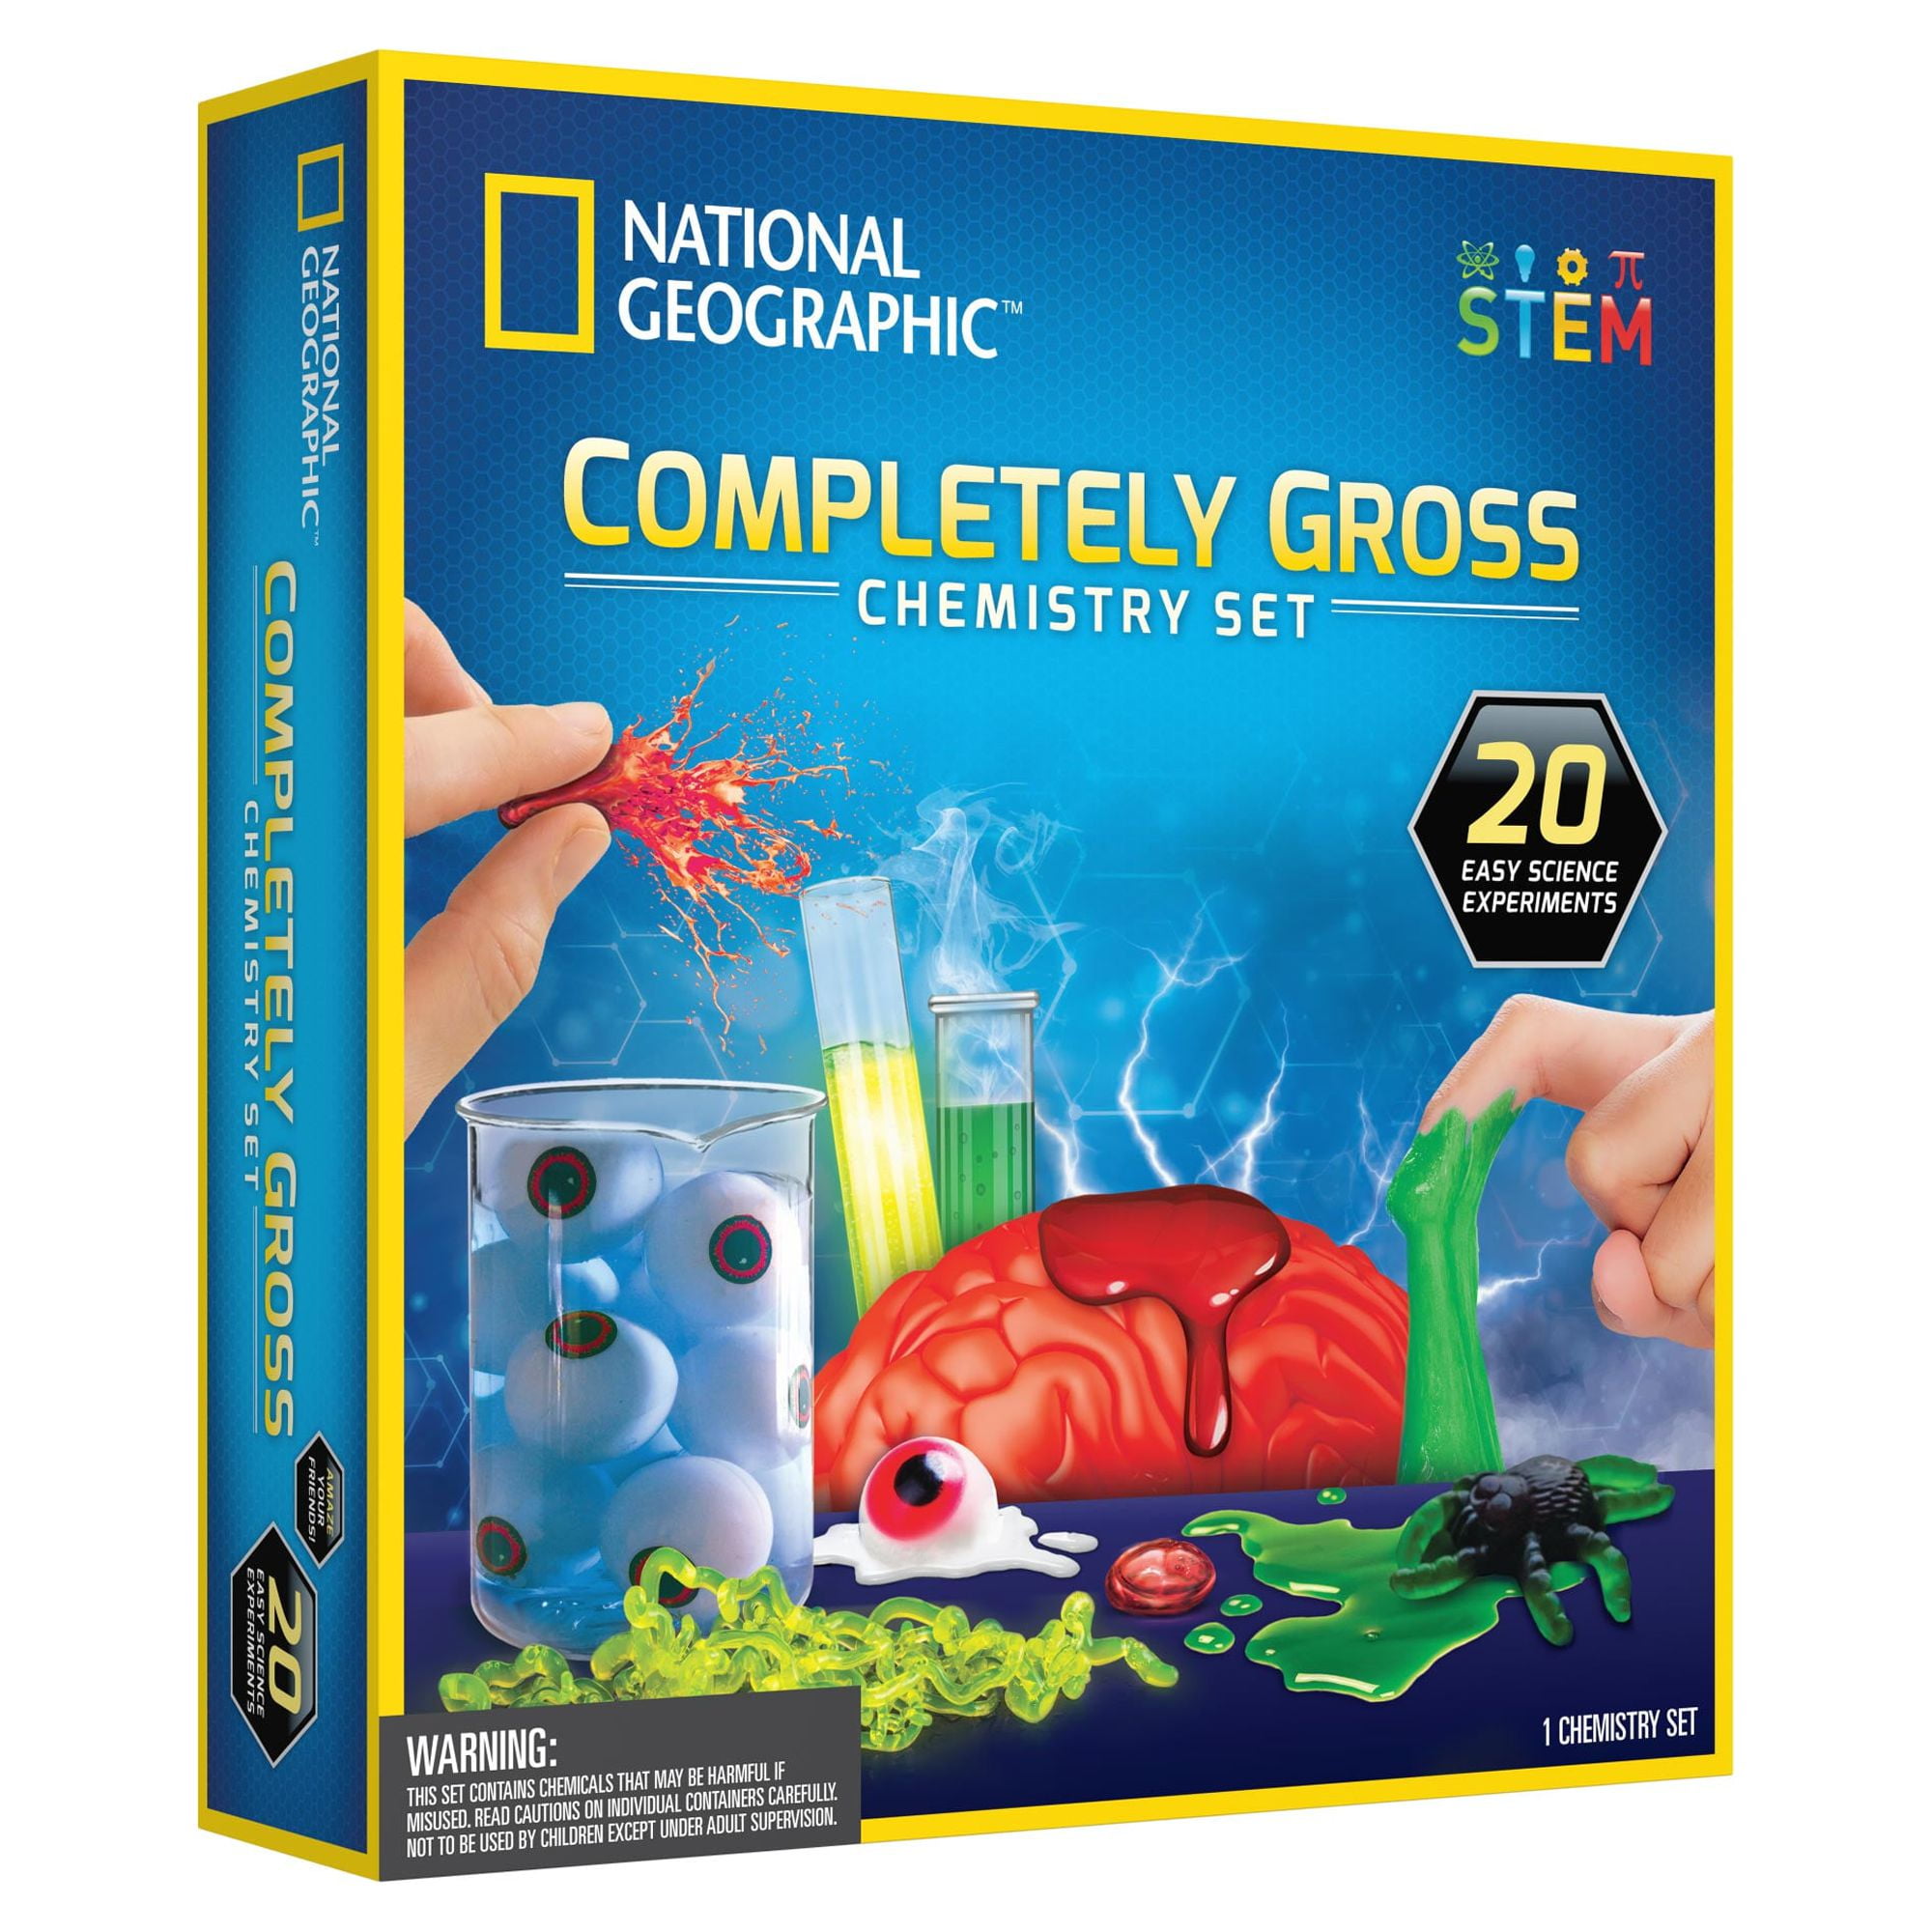 STEM at home with National Geographic experiment-based kits 